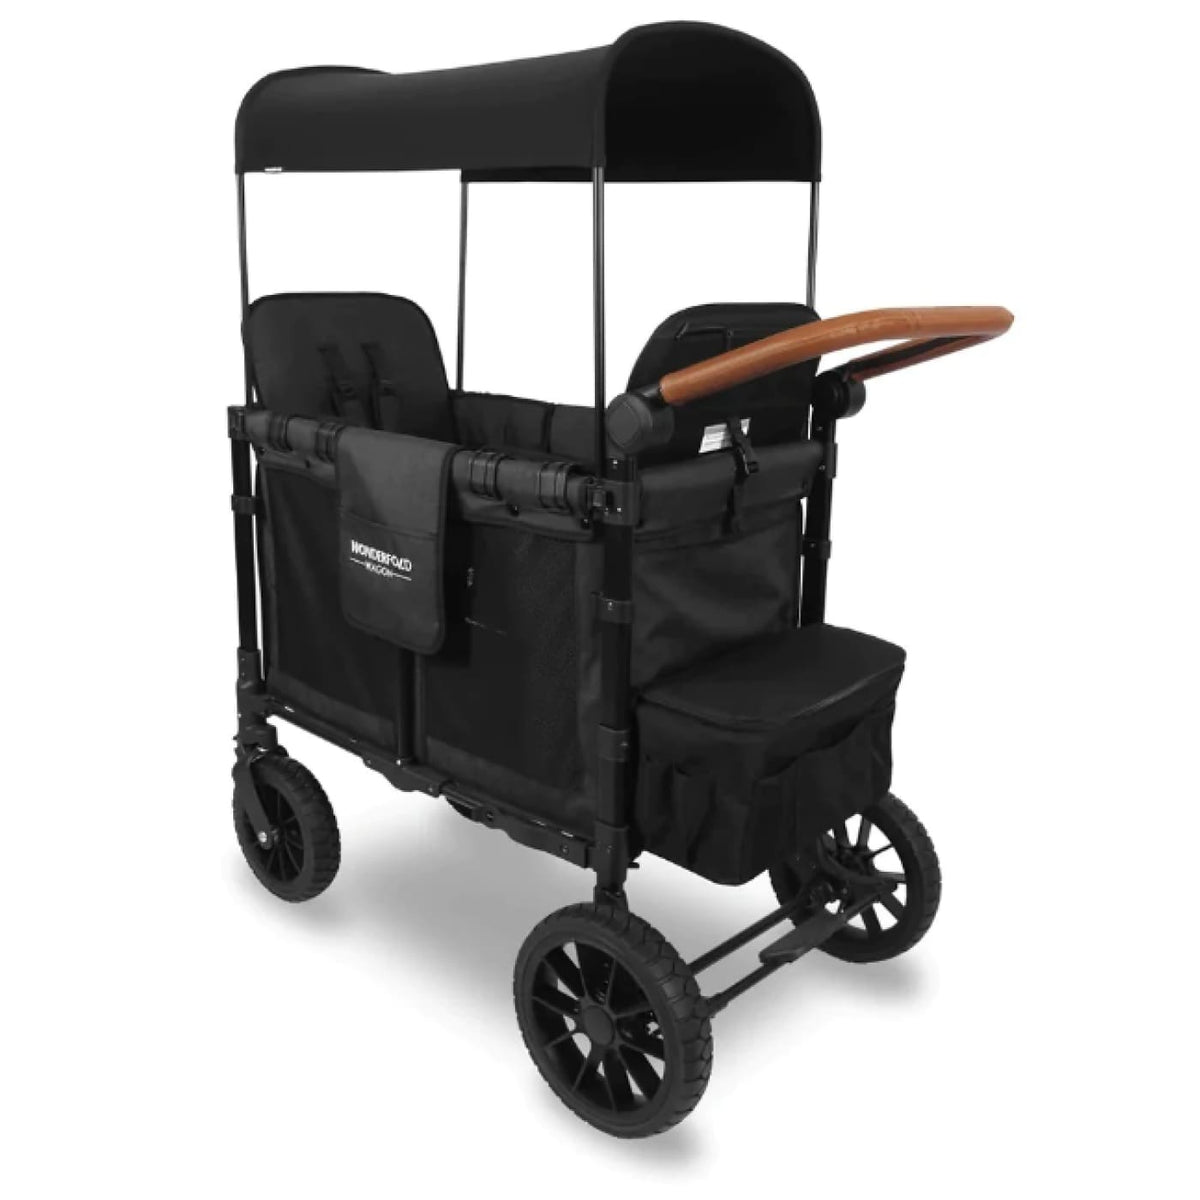 Wonderfold W2 Luxe Double Wagon Charcoal Grey with Black Frame - Charcoal Grey with Black Frame - PRAMS &amp; STROLLERS - WAGONS